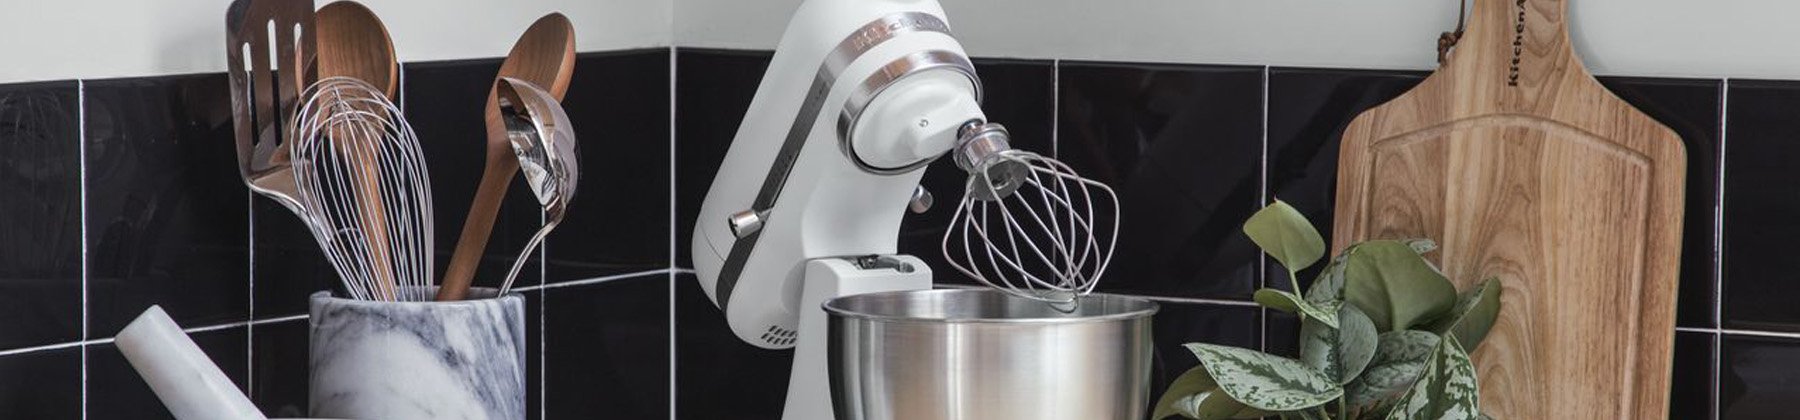 https://cdn.everythingkitchens.com/media/wysiwyg/images/KitchenAid/Mixer-Compatibile-Collection-Banner-3.5.jpg